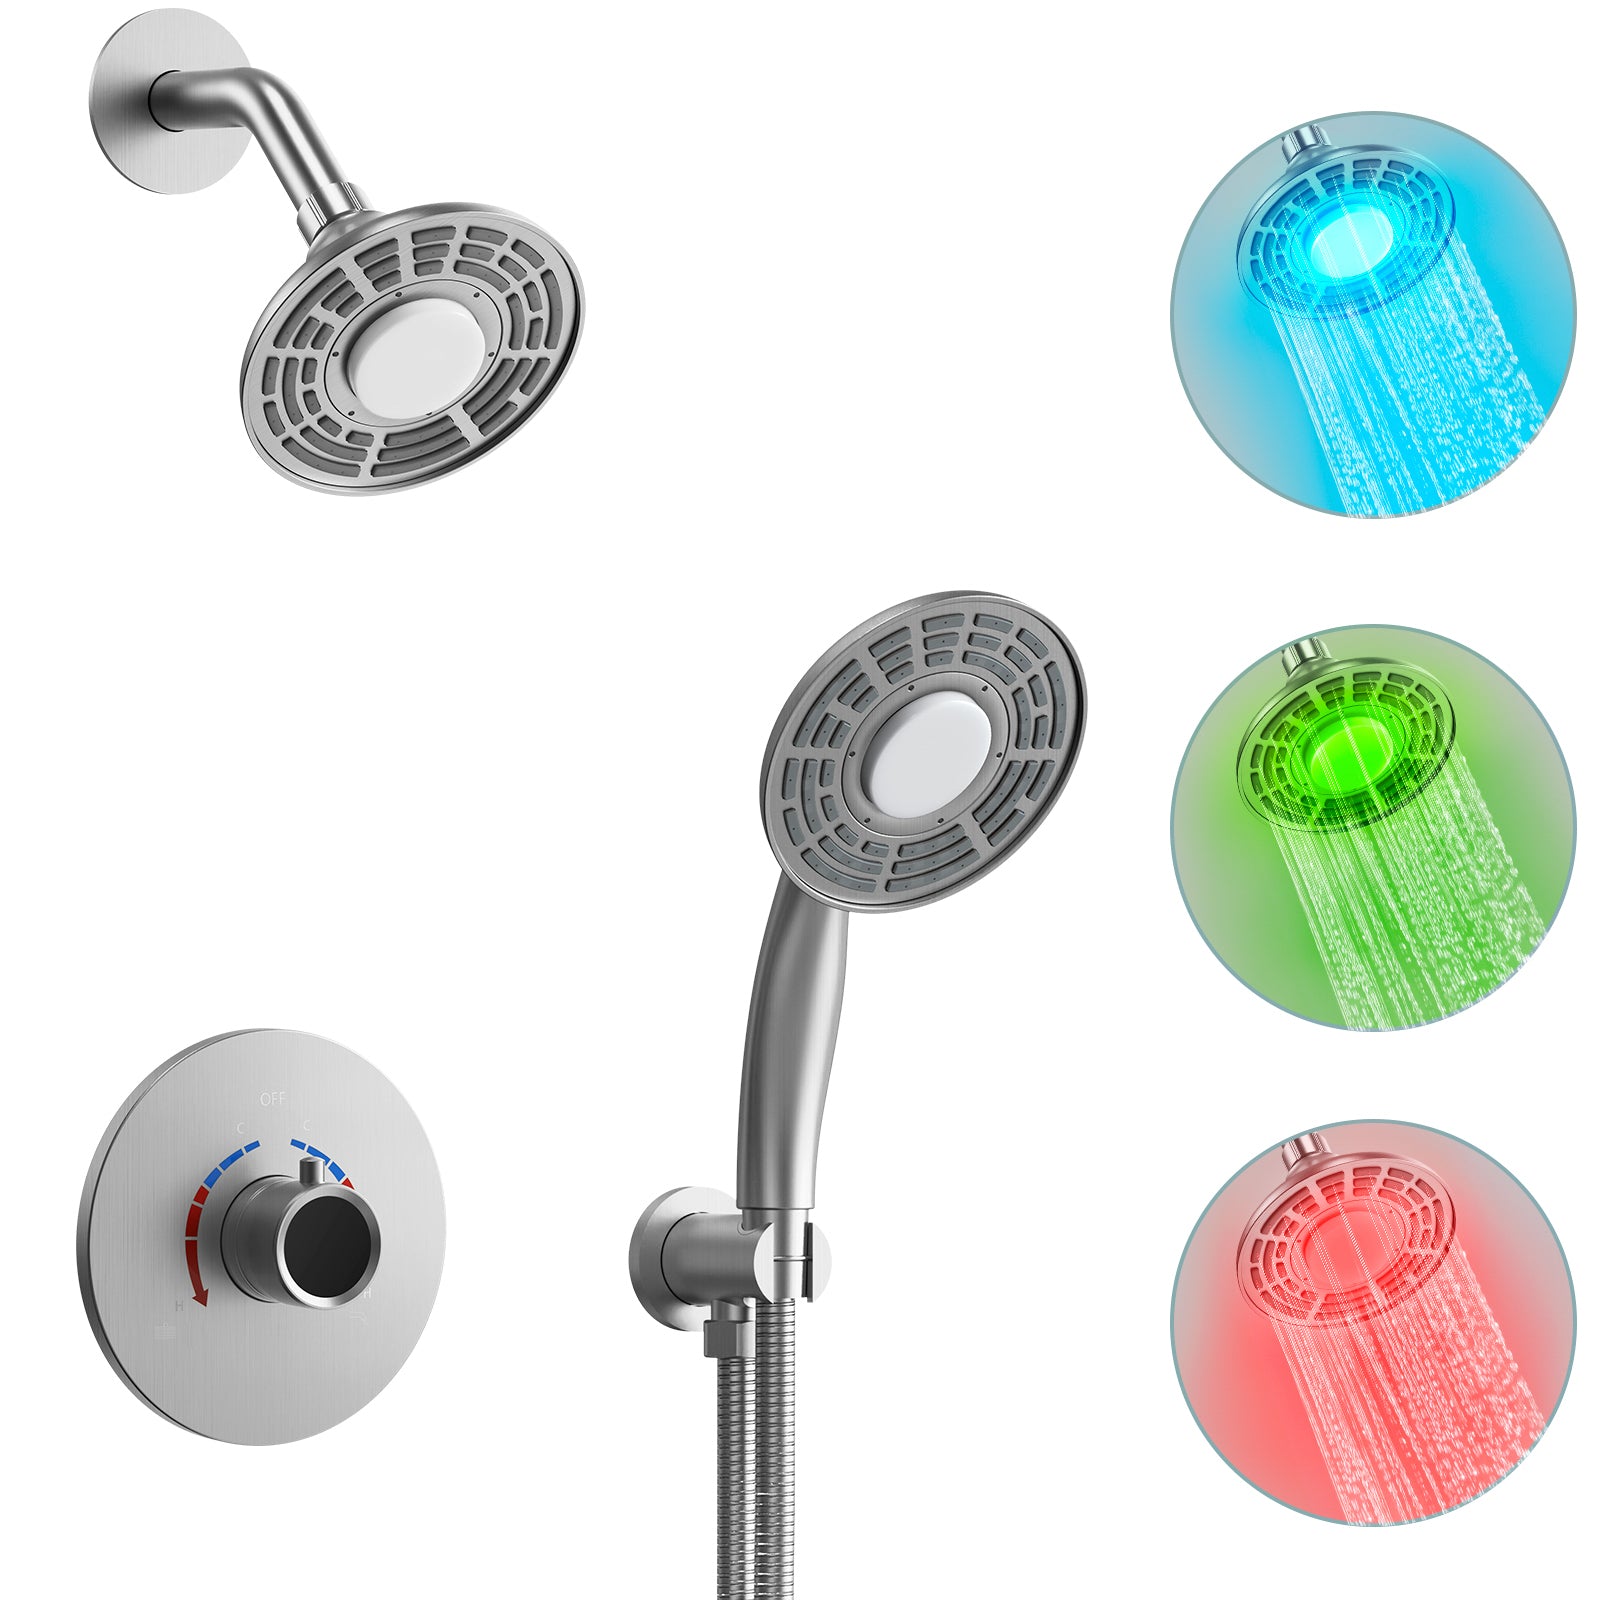 SFS-1022-NK5 EVERSTEIN LED Shower Head Shower Faucet Set with Rough-in Valve in Brushed Nickel